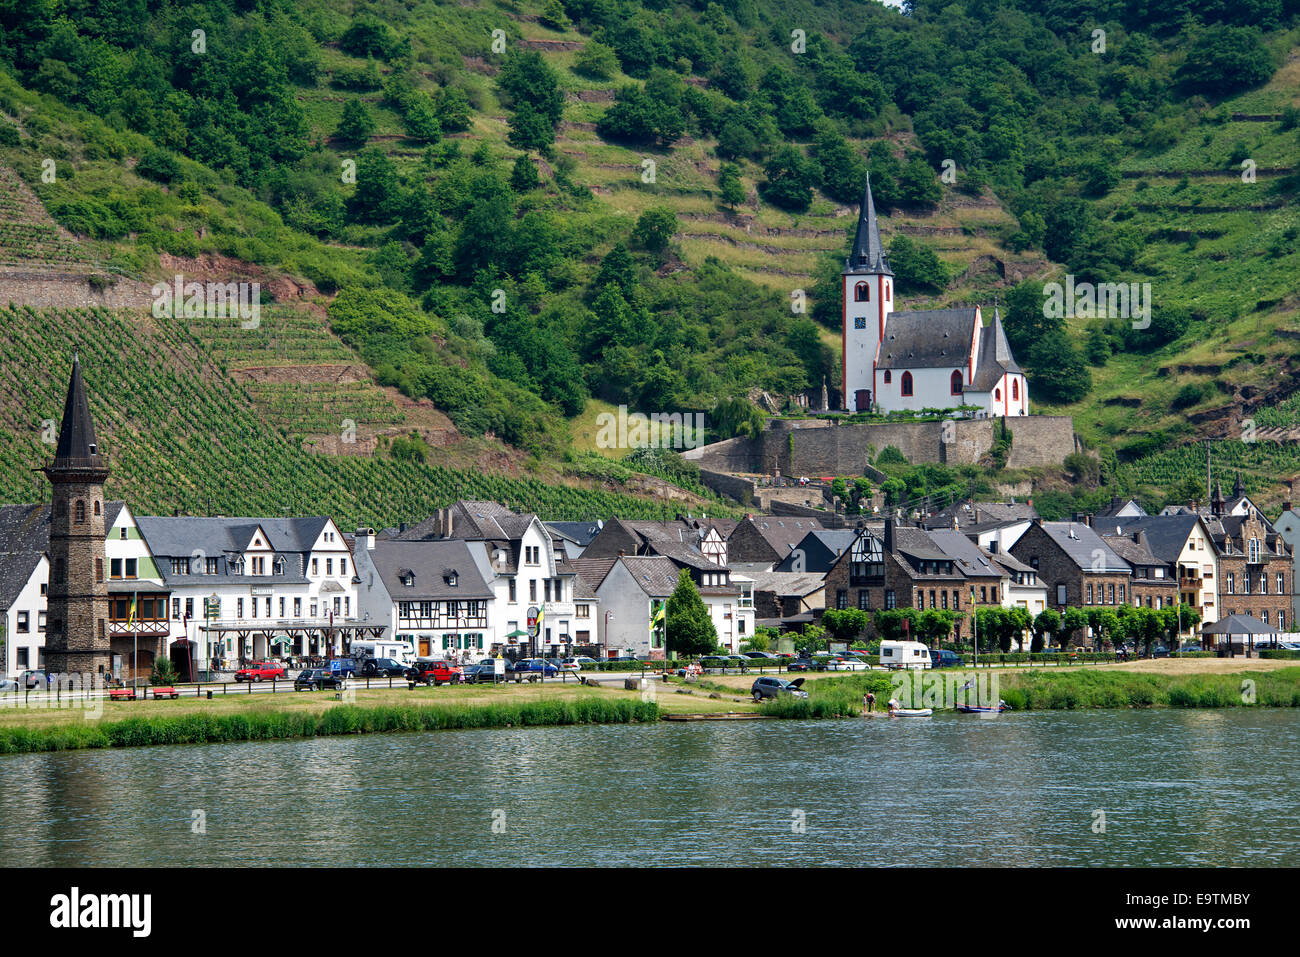 Hatzenport village and church Lower Moselle River Moselle Germany Stock Photo